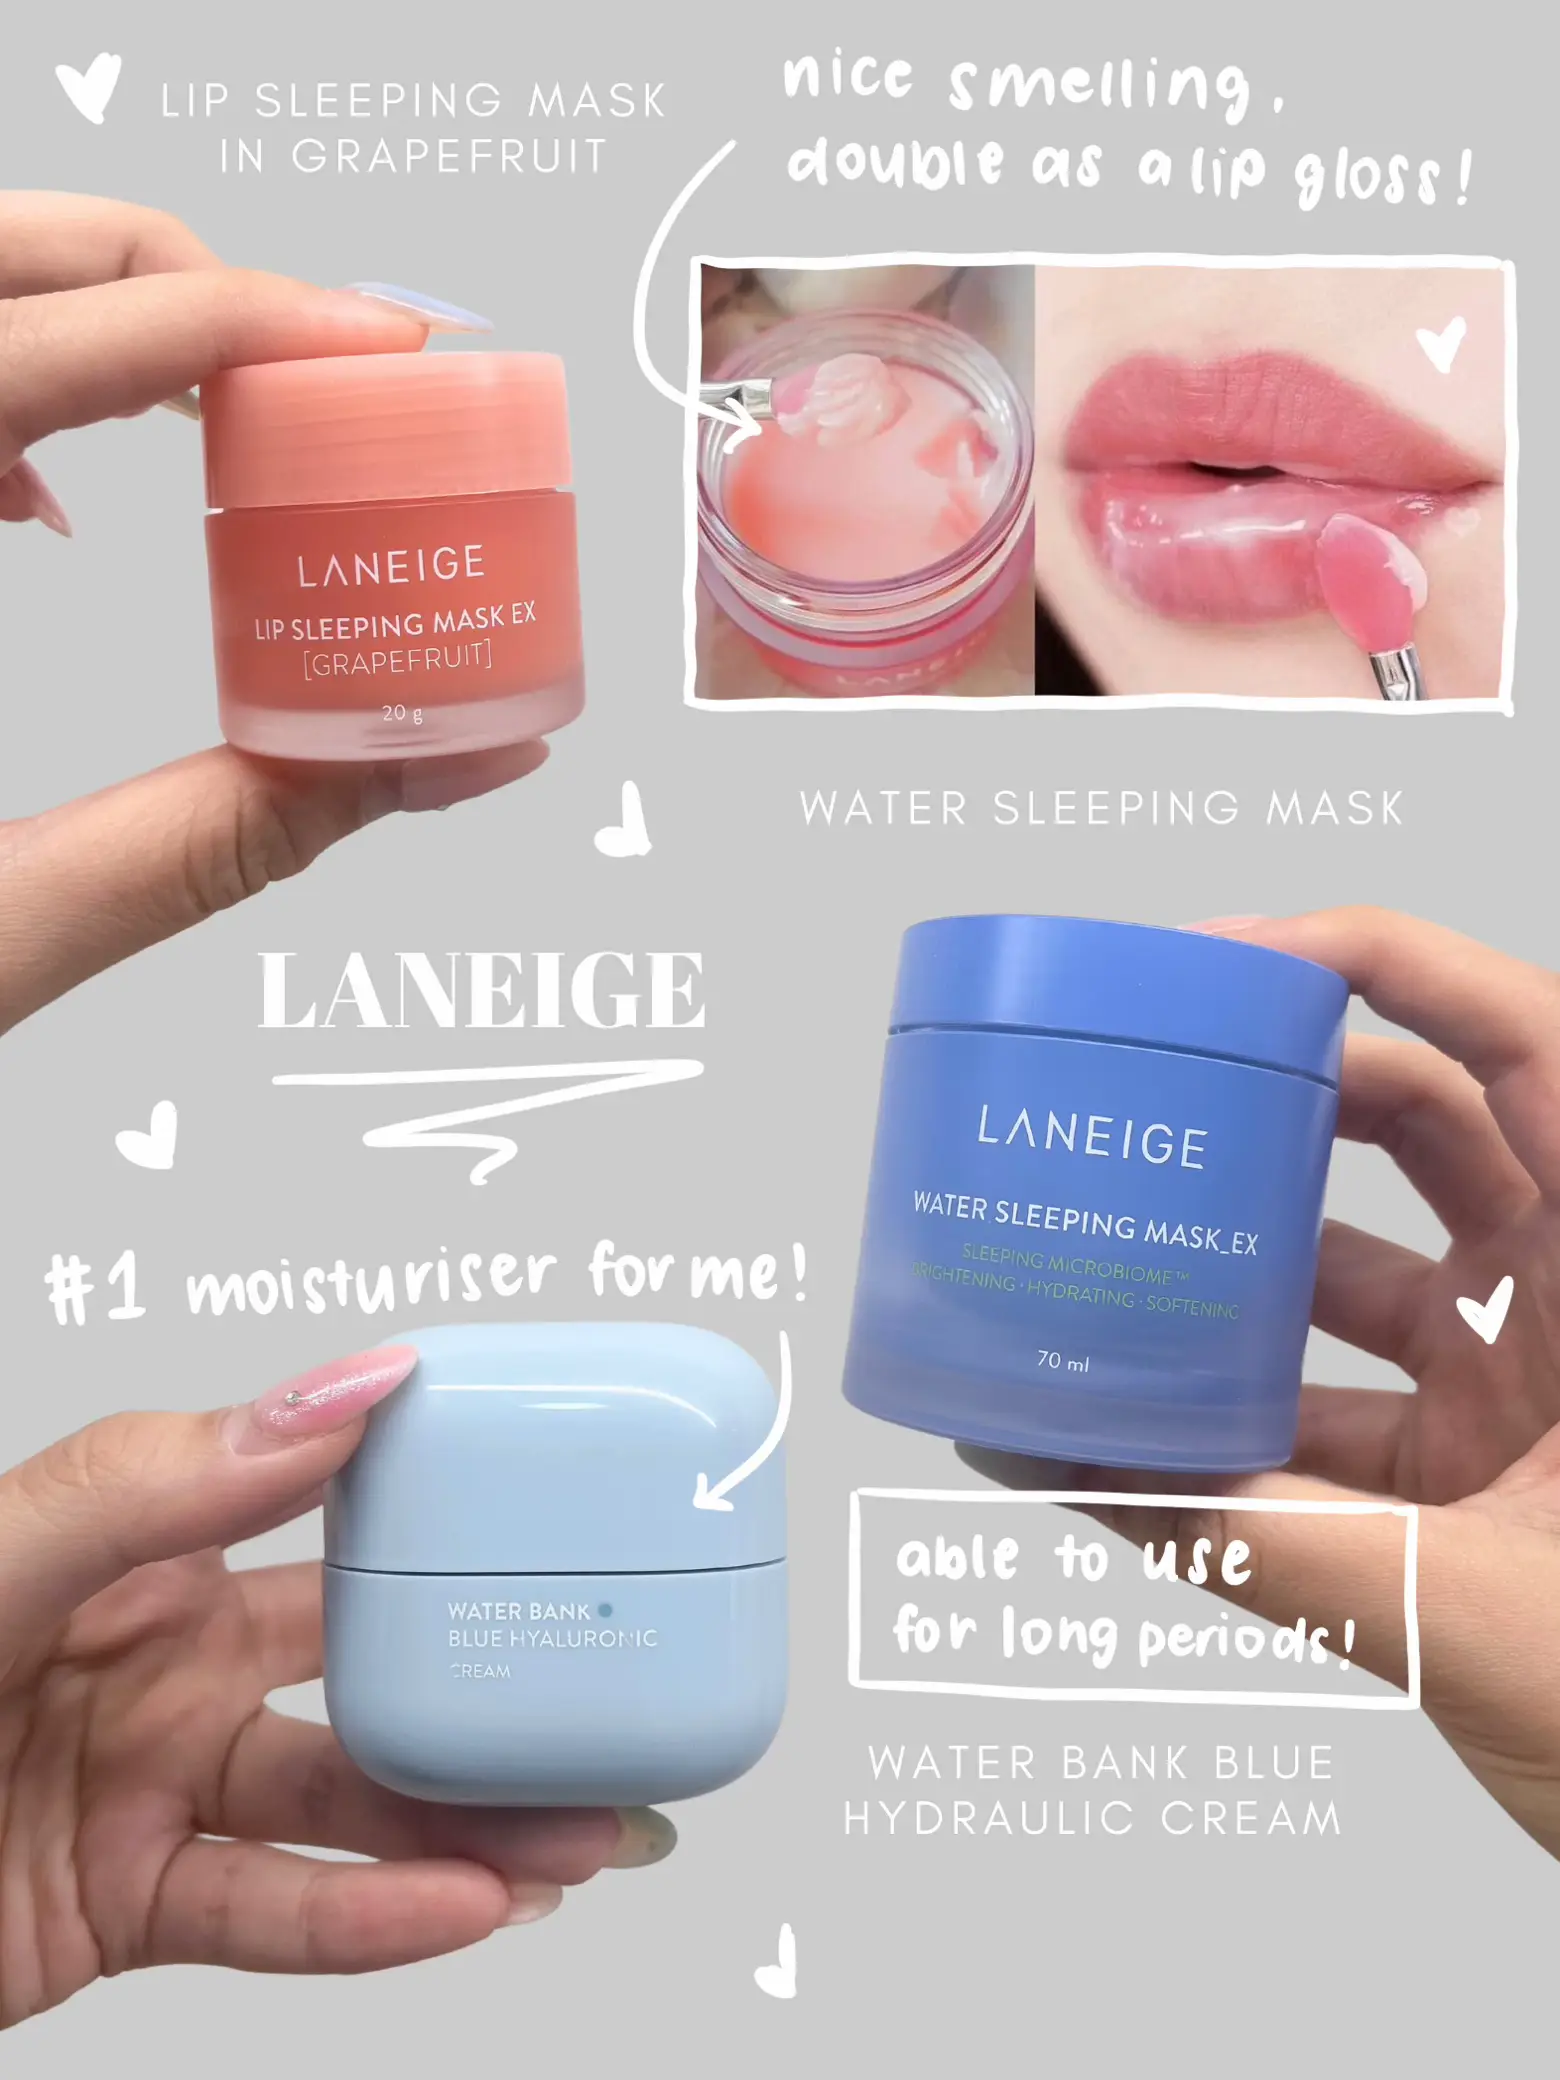 MUST BUY korean SKINCARE products! 😍 DONT MISS OUT's images(2)